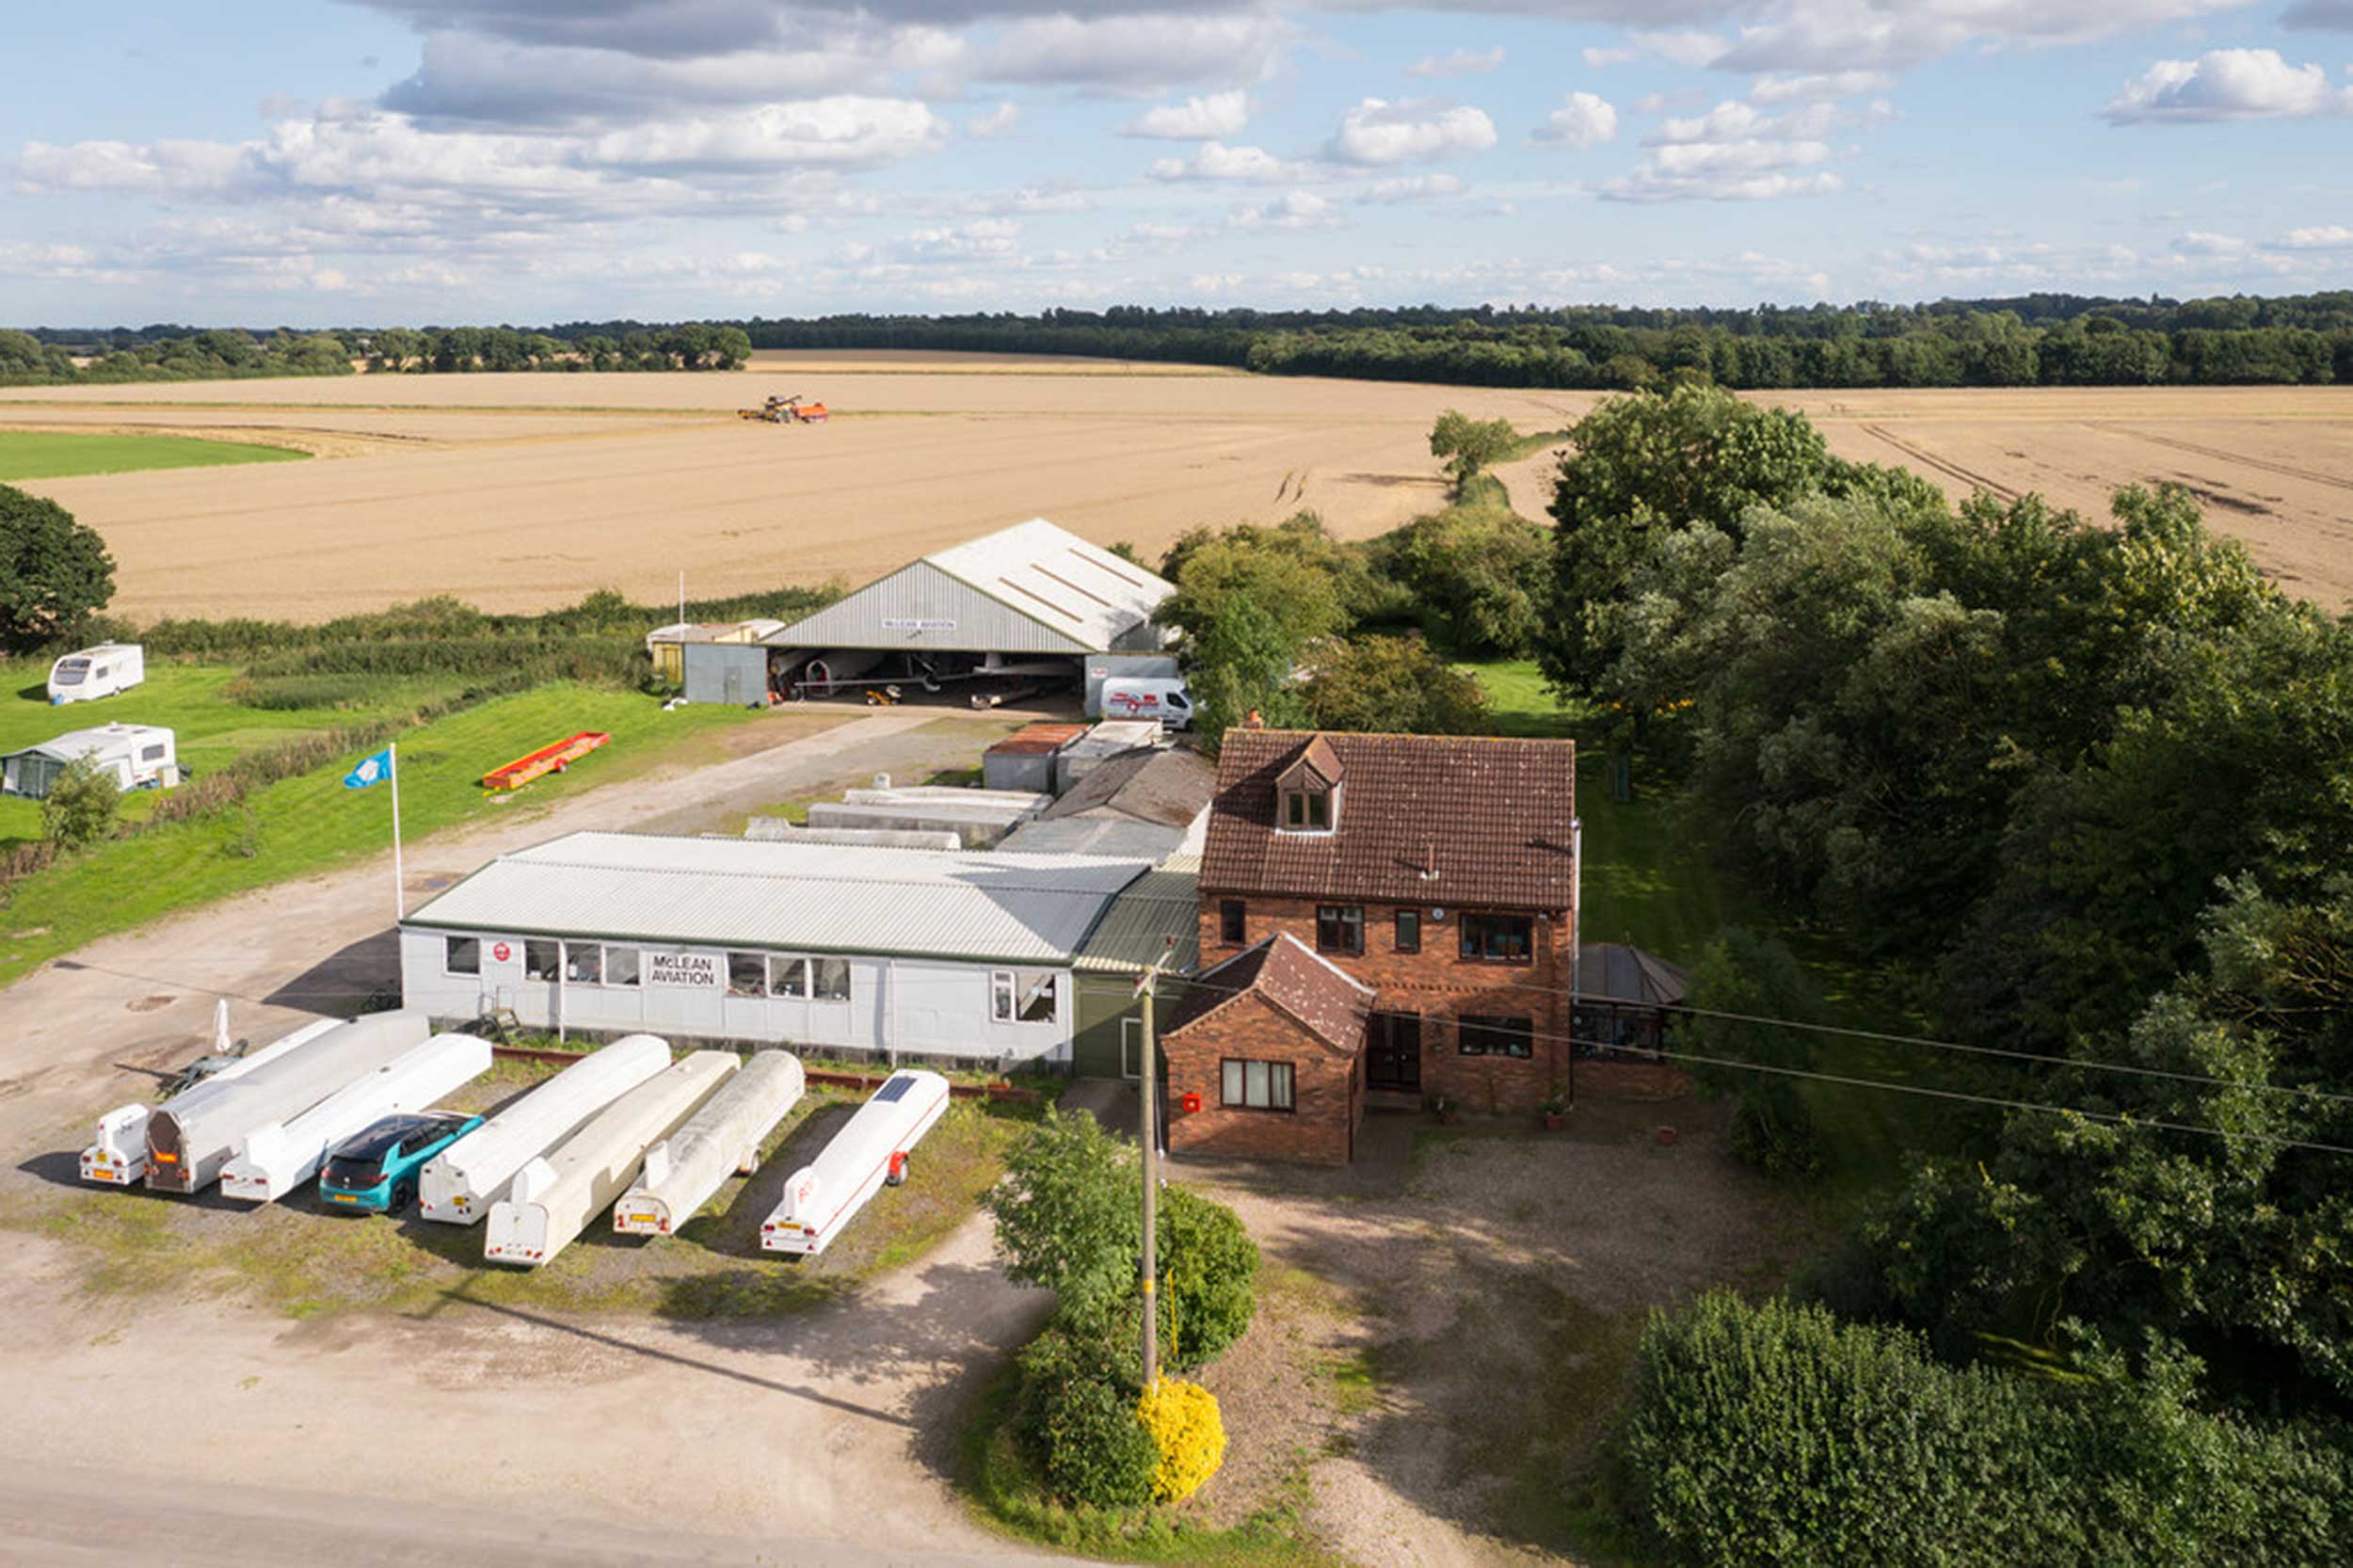 The existing McLean Aviation business premises are part of the sale